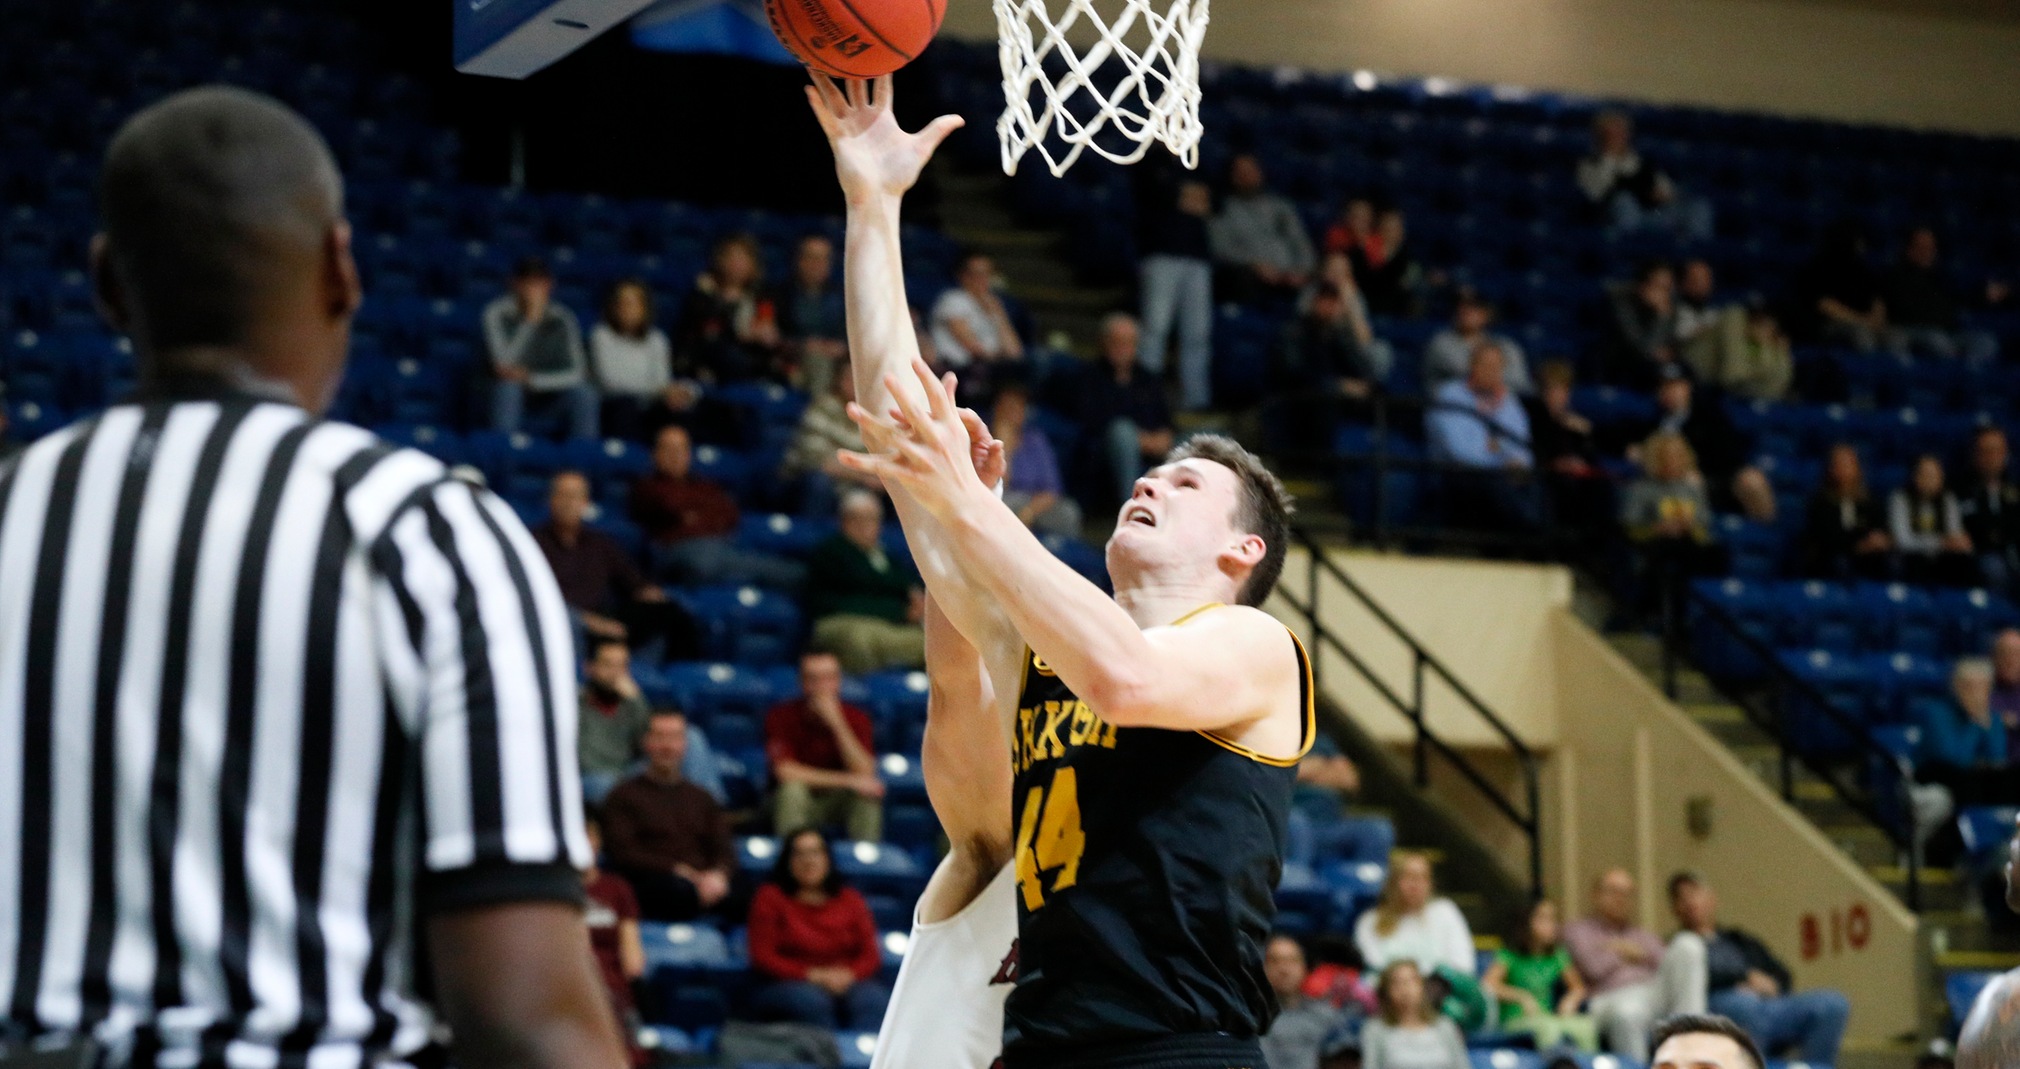 Jack Flynn recorded his ninth career double-double with 20 points and 10 rebounds against the Lions.